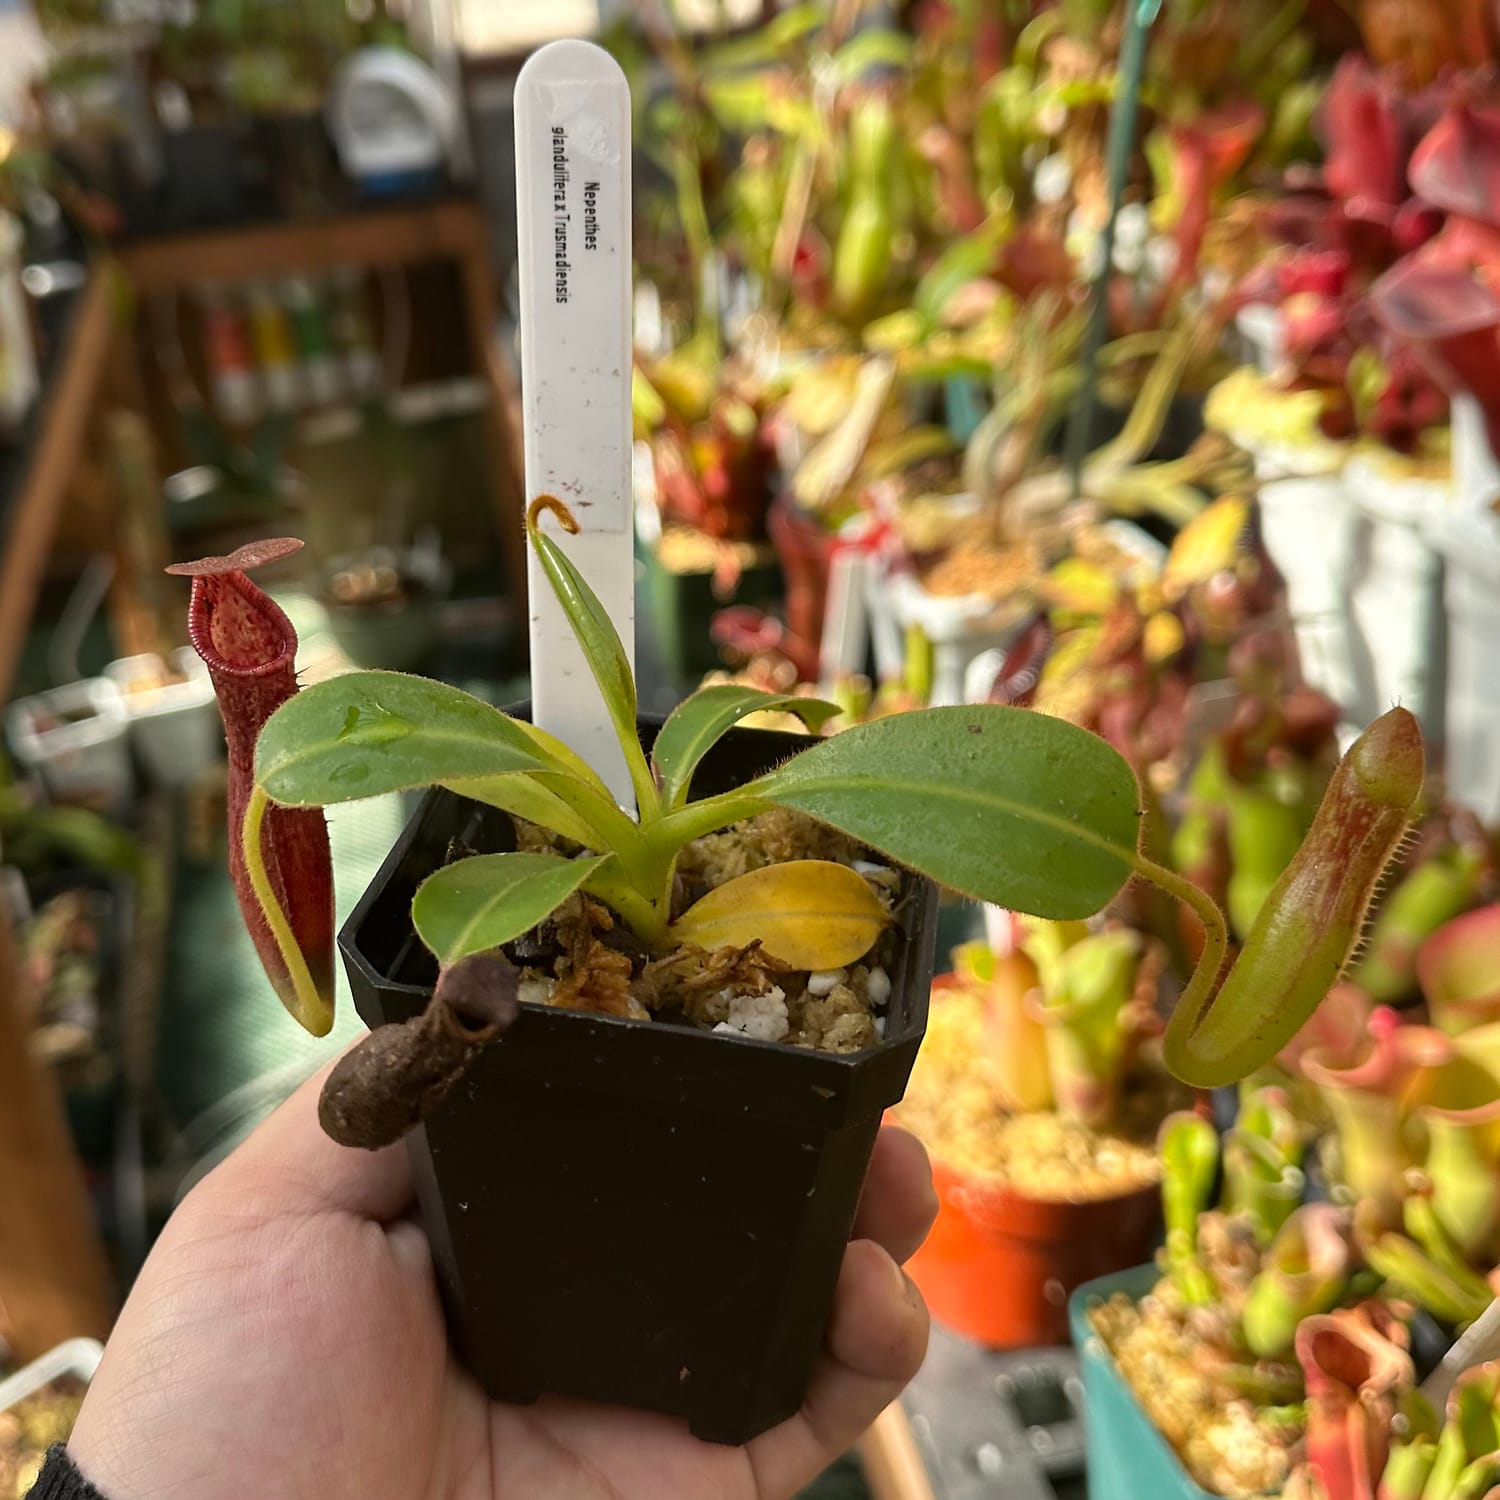 A hand holding Nepenthes glandulifera x Trusmadiensis plants